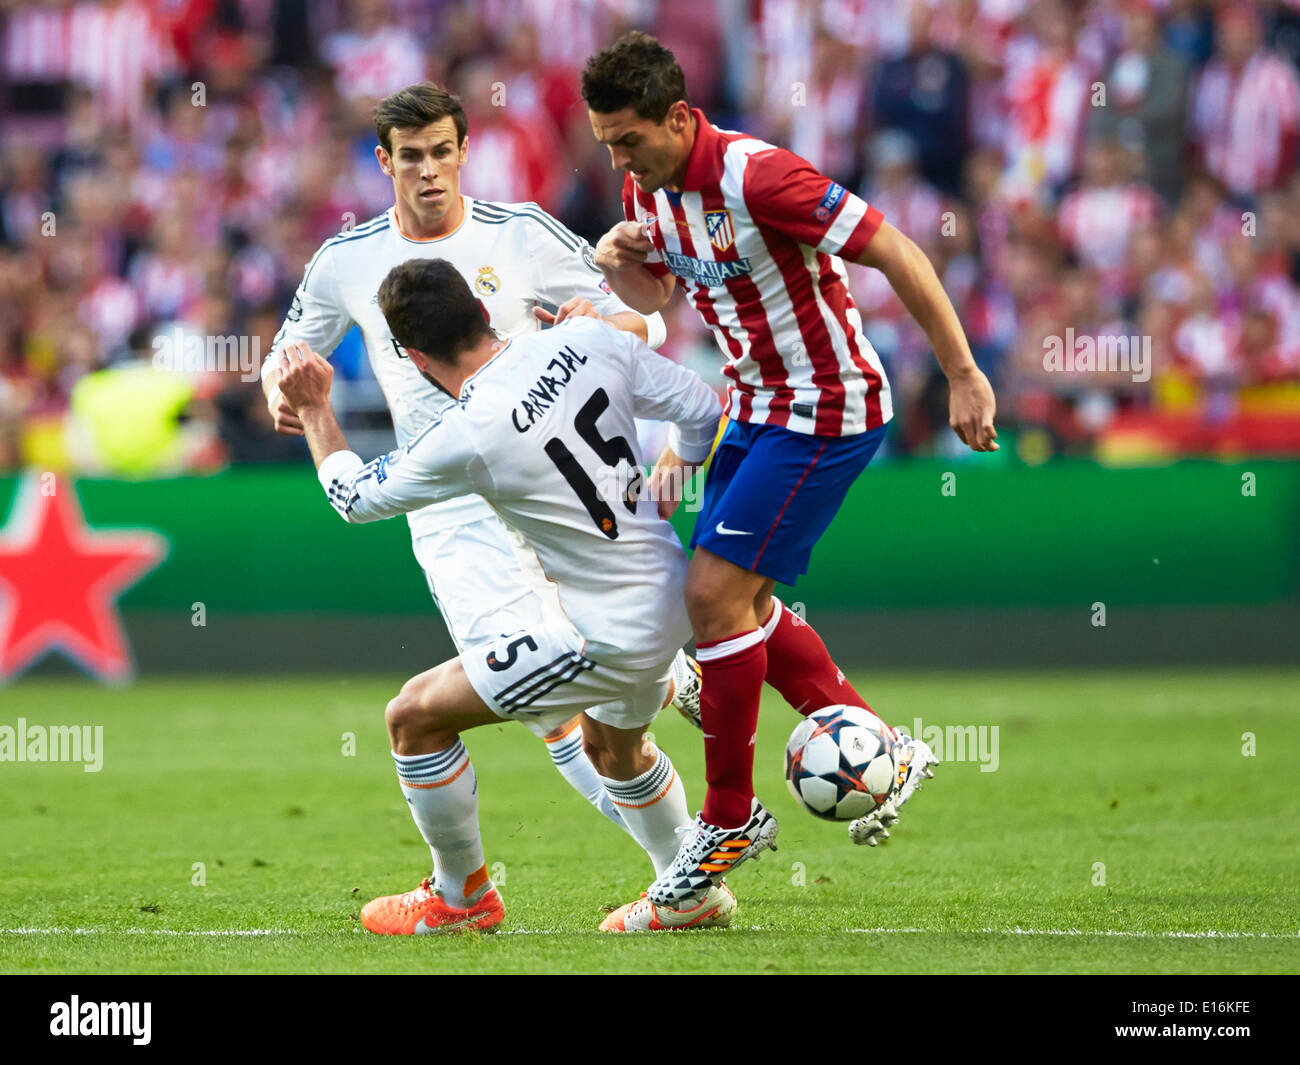 24.05.2014, Lisbon, Portugal. Midfielder Jorge Resurreccion (koke) of Atletico Madrid (R) takes on Defender Daniel Carvajal of Real Madrid with a cheeky backheel during the UEFA Champions League final game between Real Madrid and Atletico Madrid at Sport Lisboa e Benfica Stadium, Lisbon, Portugal Stock Photo